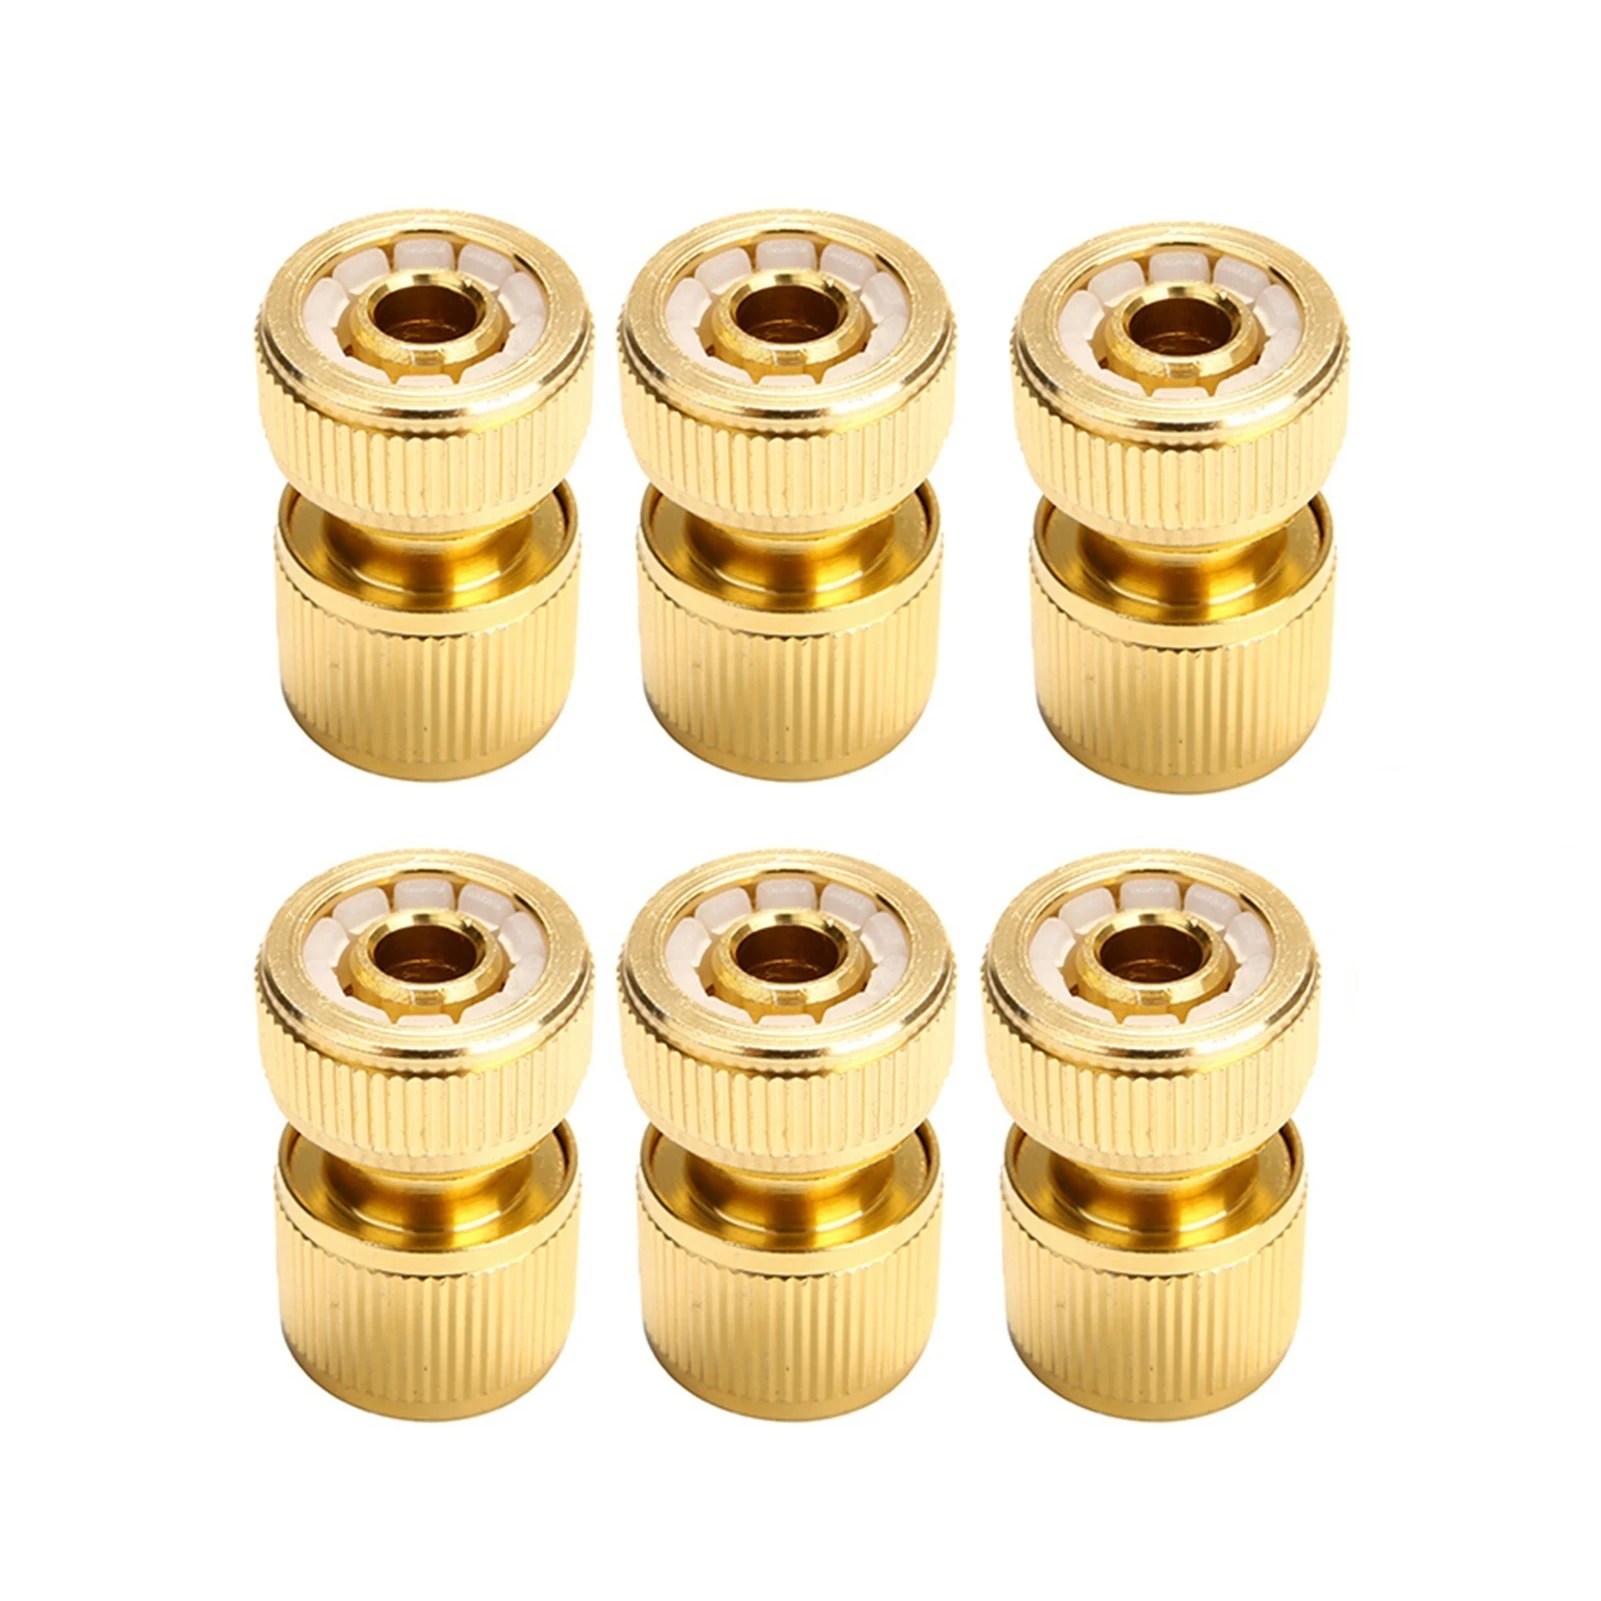 Jiaqi-cnnectors 6Pcs Universal Brass Pipe Hose Quick Connector for 1/2 Watering Pipe Fitting 